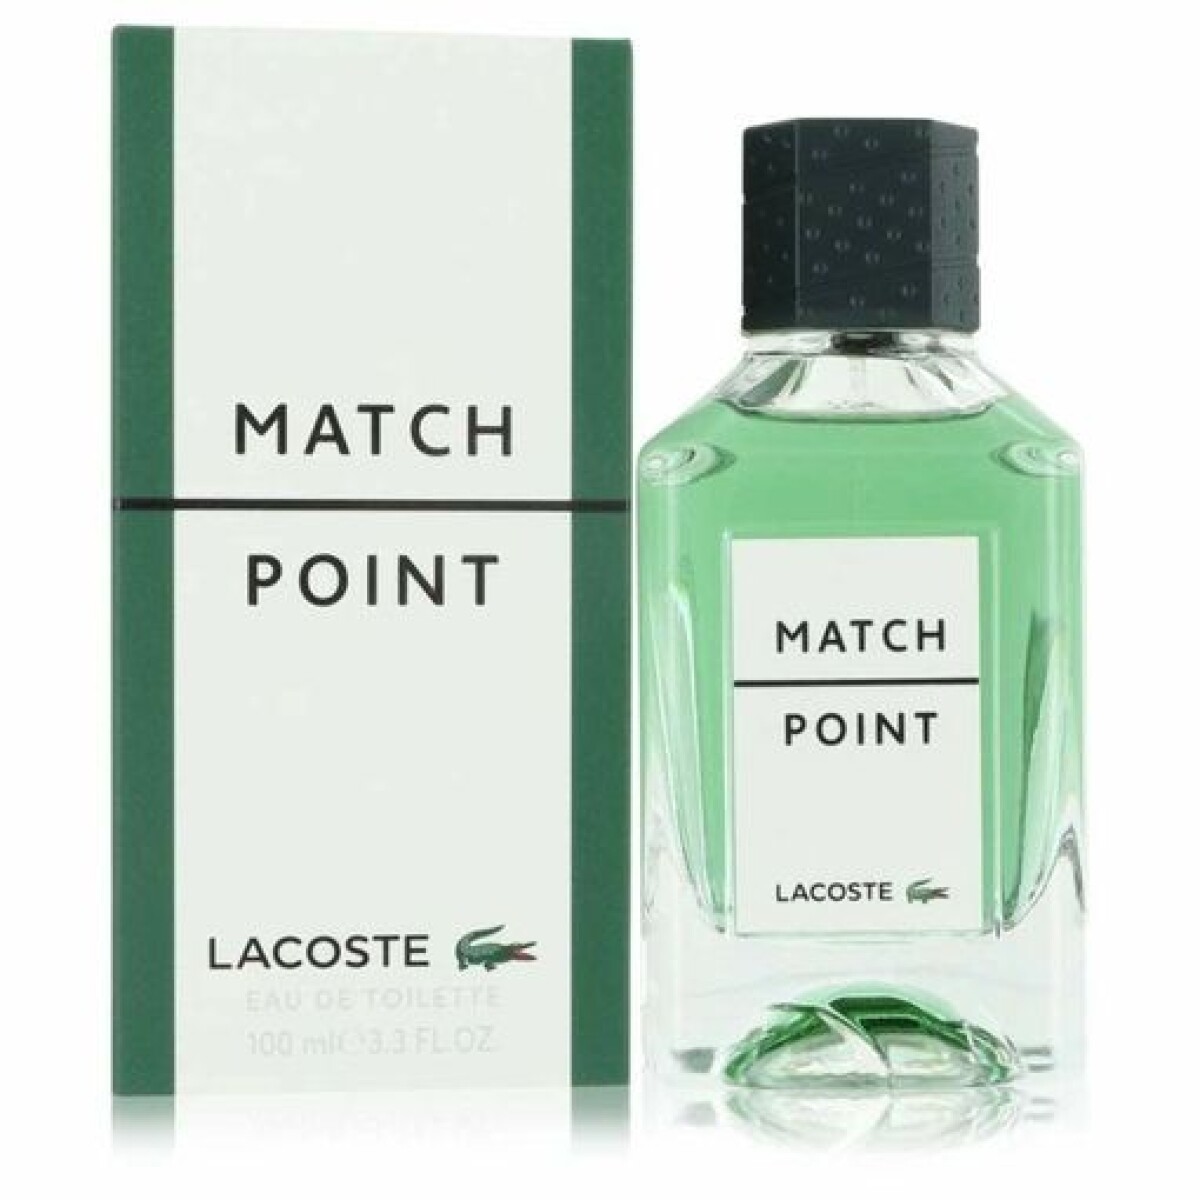 PERFUME LACOSTE MATCH POINT EDT 100ml 